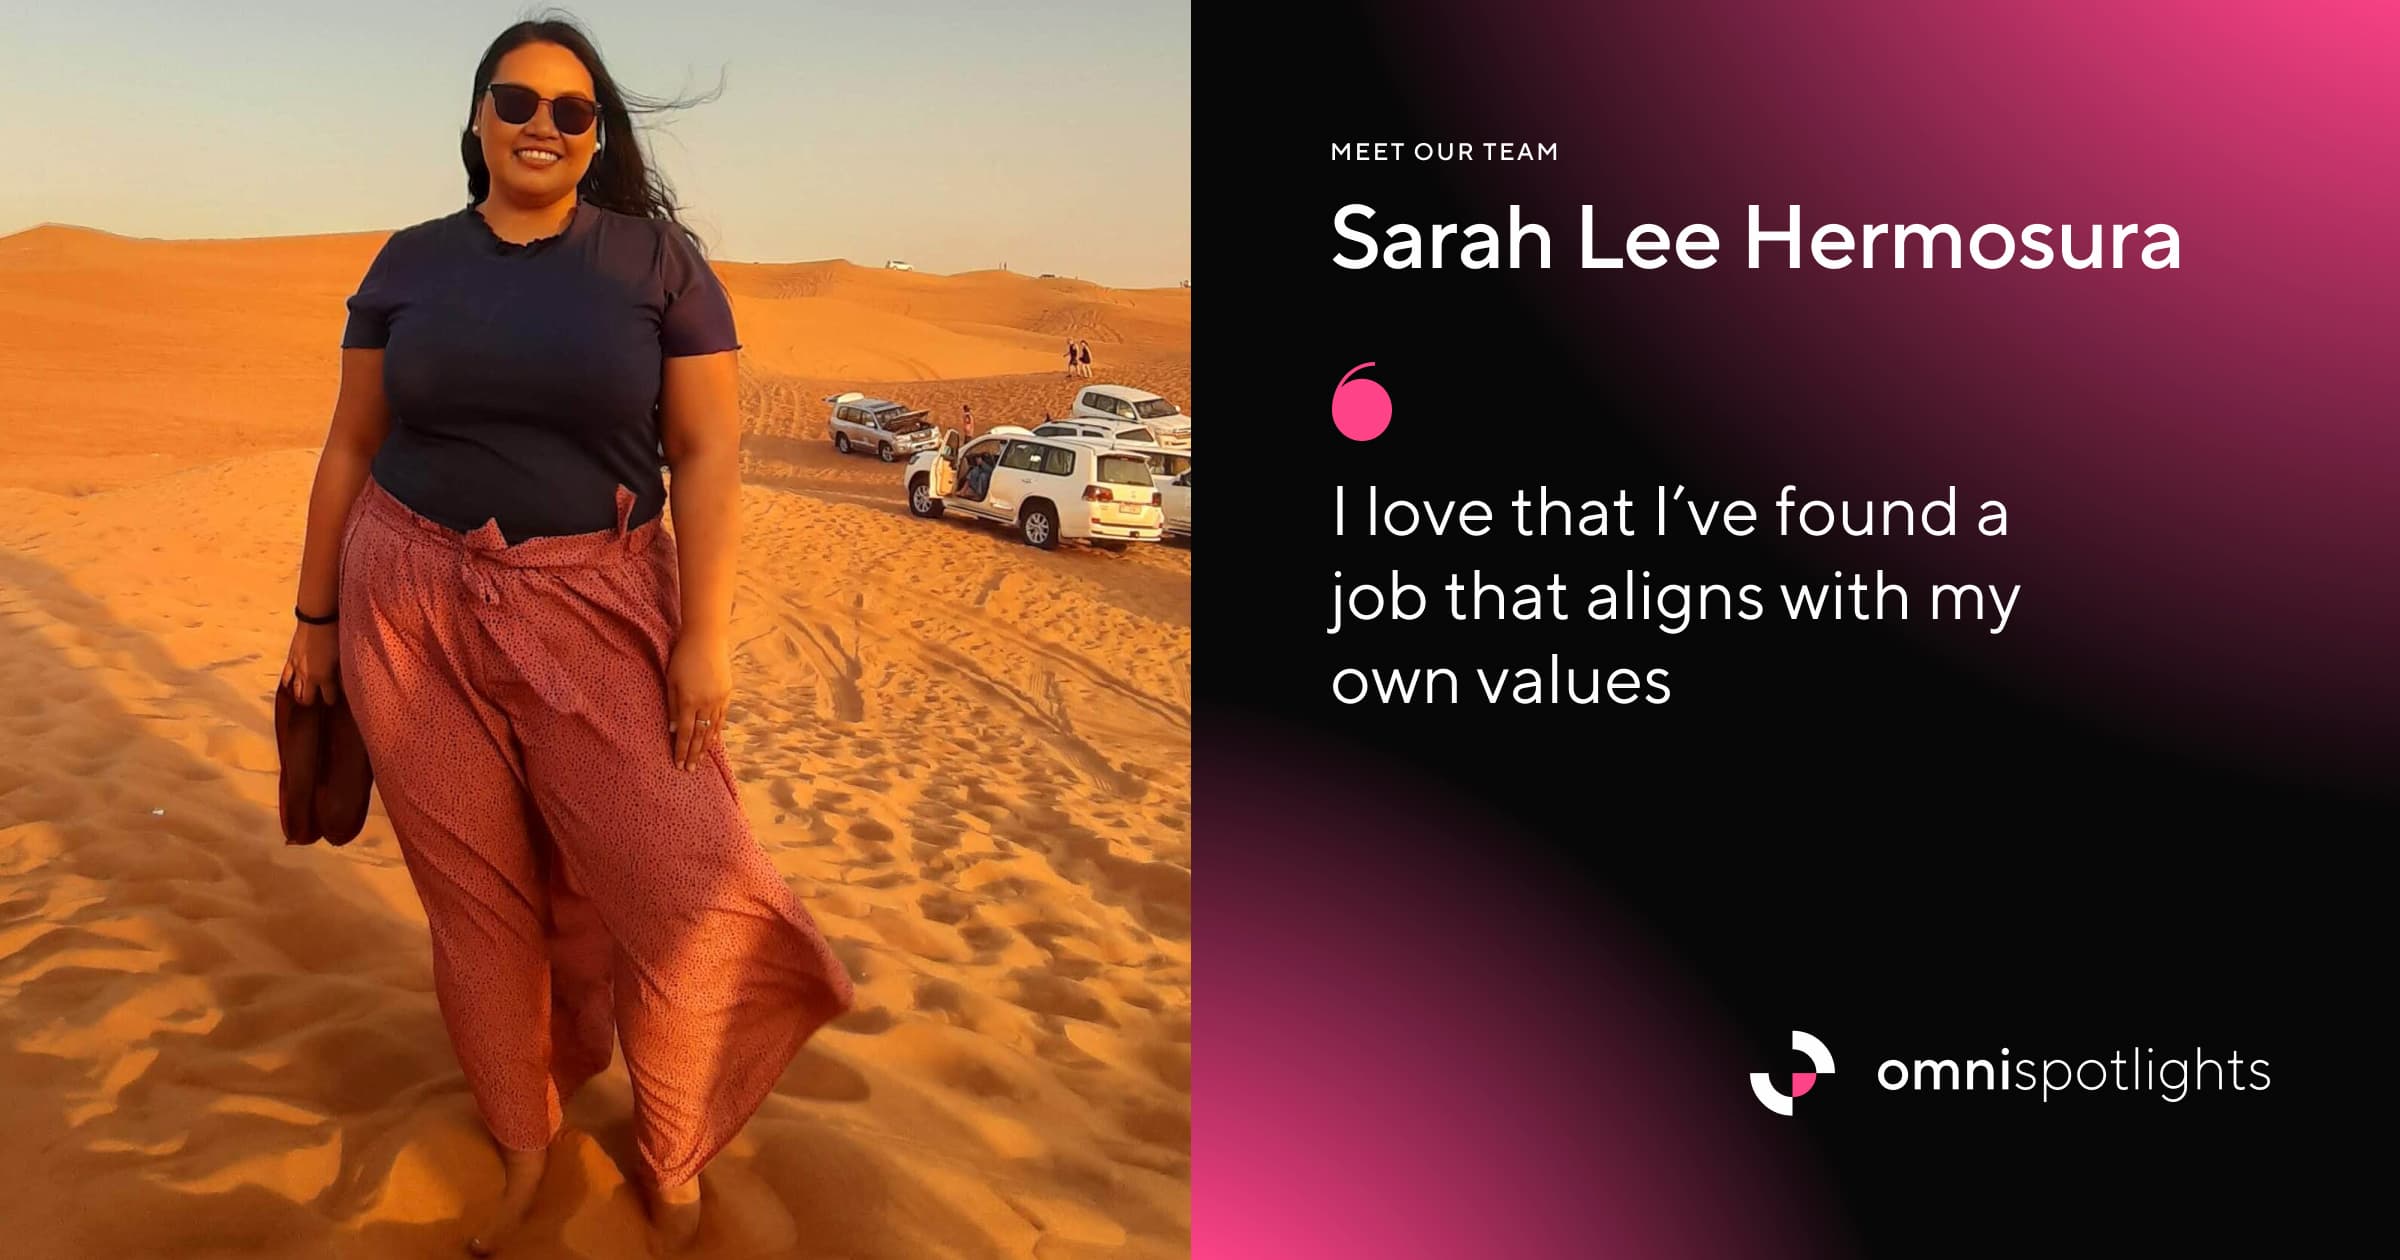 Photo of Sarah standing in the desert. Next to the photo is text reading: 